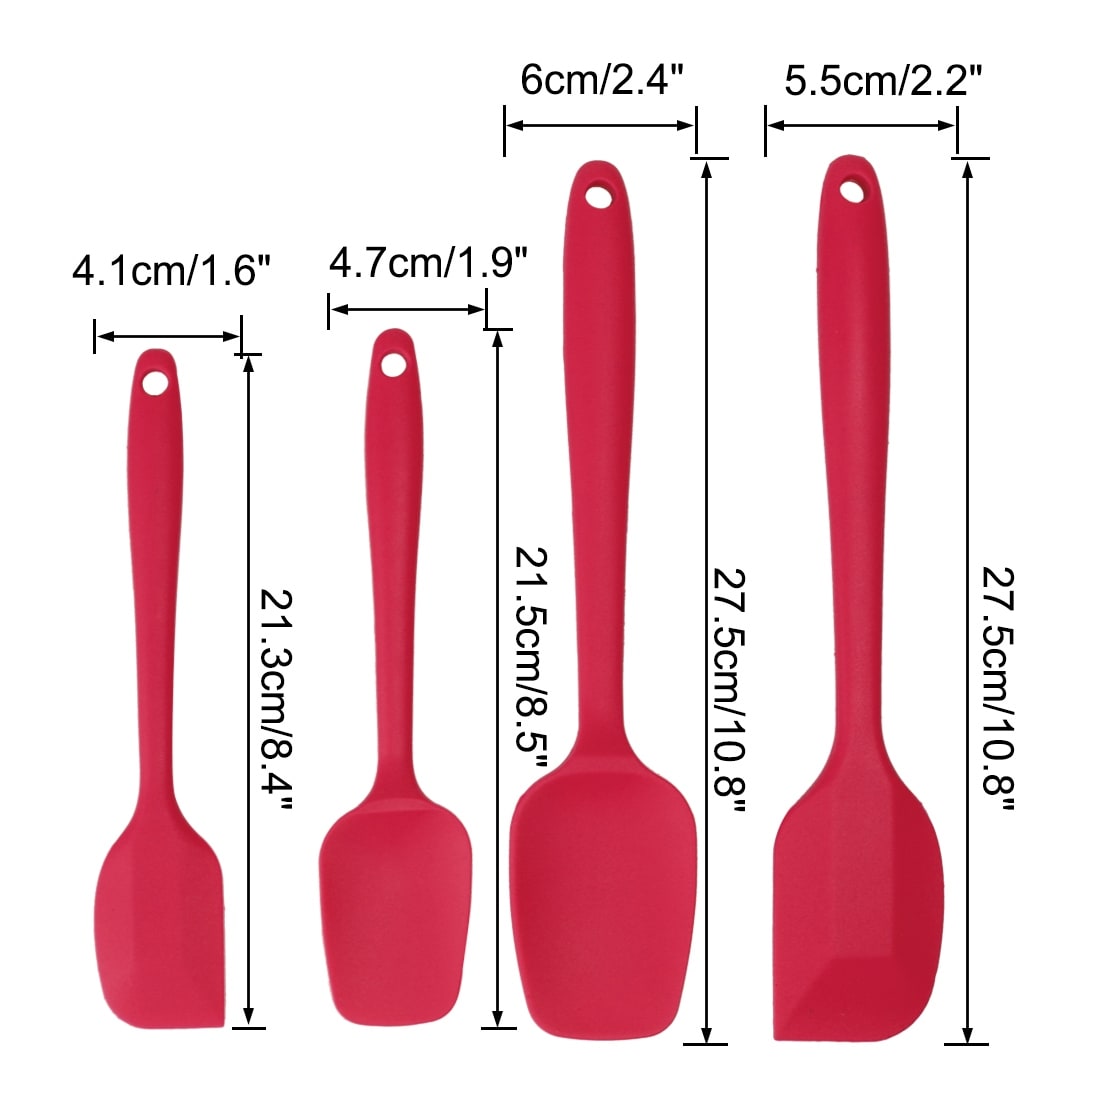 https://ak1.ostkcdn.com/images/products/is/images/direct/caa82b85b01f3a52a810b4341610204d4ce15dc3/4pcs-Silicone-Spatula-Set-Heat-Resistant-Non-Stick-Spatula.jpg